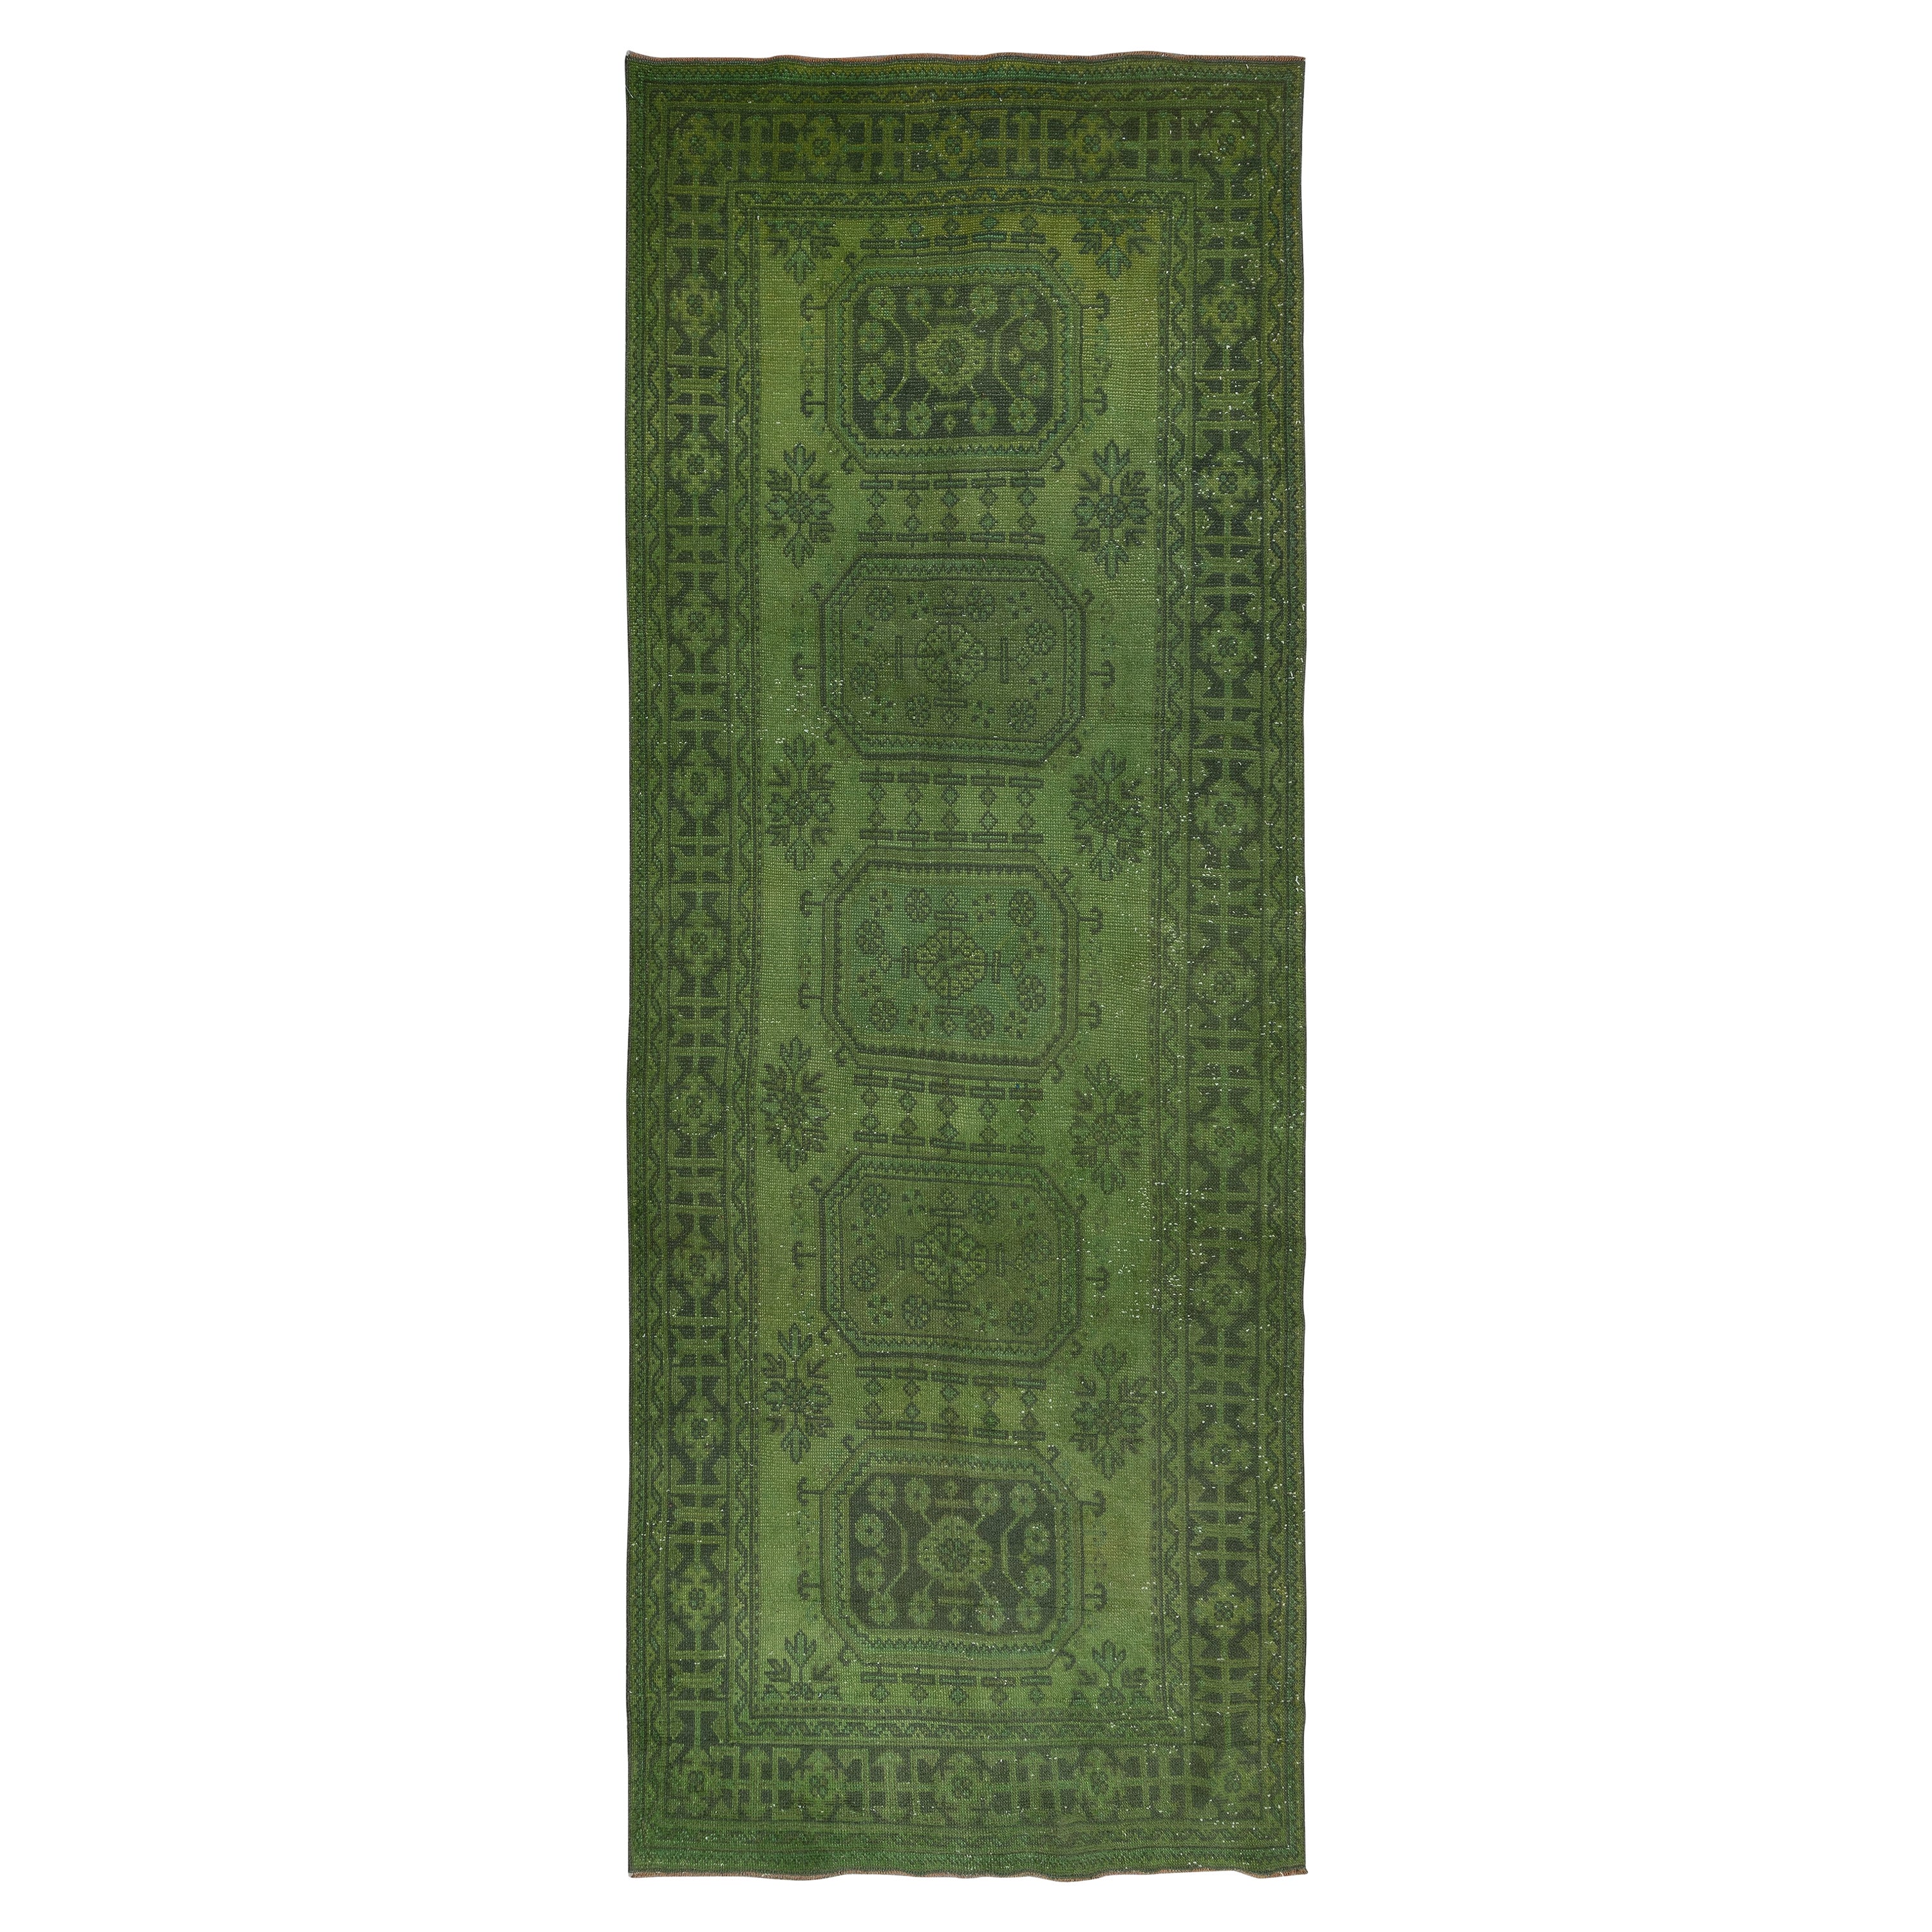 5x12 Ft Modern Handmade Turkish Runner Rug with Green Colors for Hallway For Sale